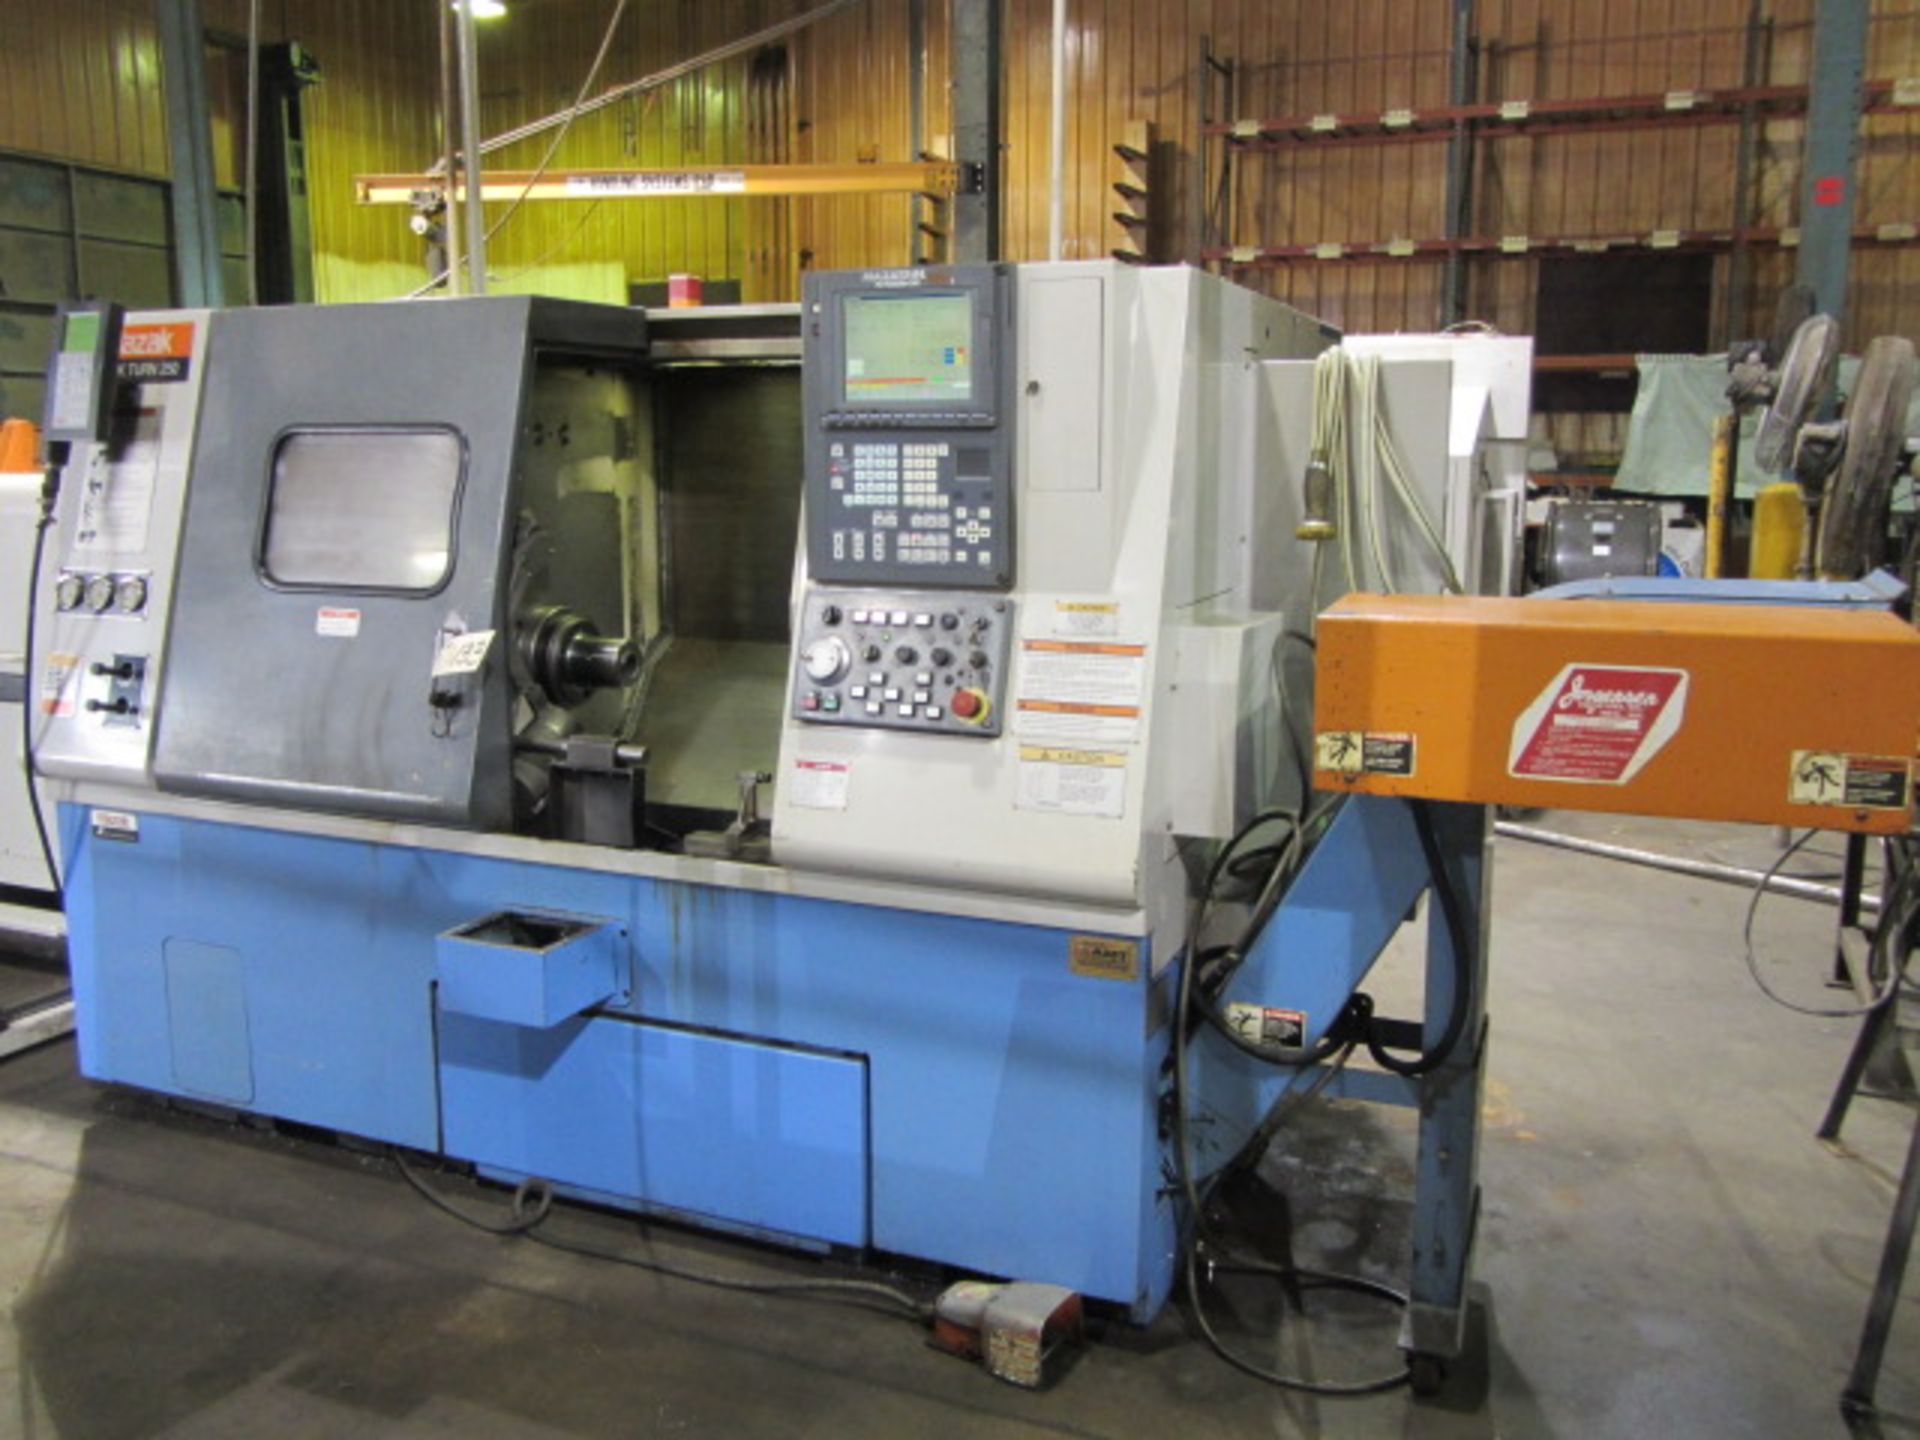 Mazak Model QT 250 CNC Turning Center with 3-Jaw Power Chuck, Collet Chuck, 24'' Centers to